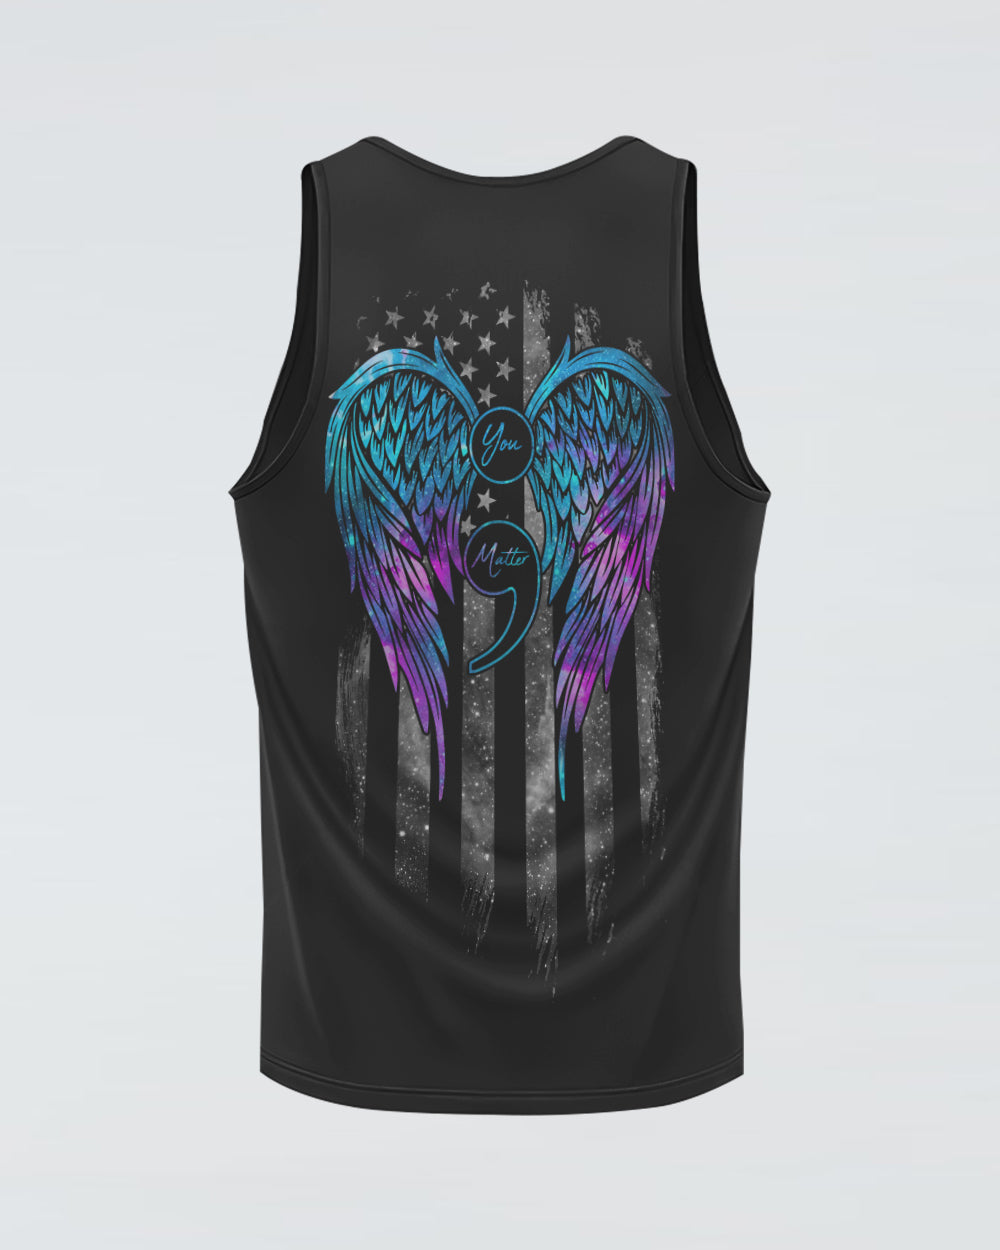 Stay Your Story Is Not Over Flag Wings Women's Suicide Awareness Tanks